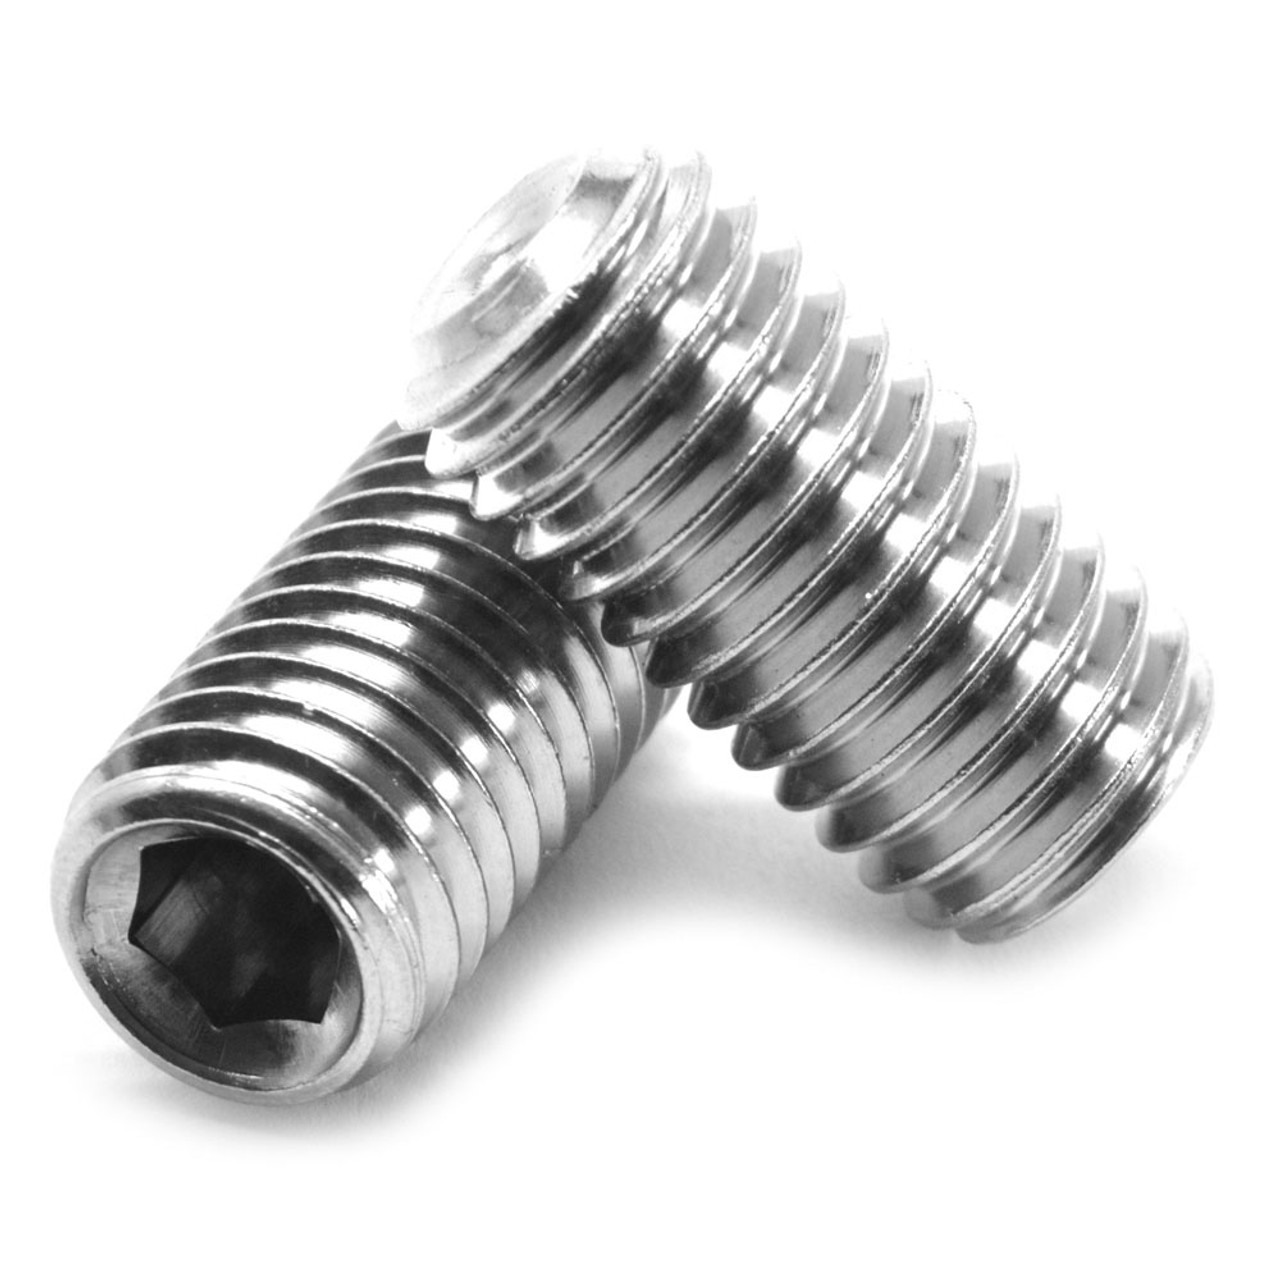 M5 x 0.80 x 20 MM Coarse Thread DIN 916 / ISO 4029 Socket Set Screw Cup Point Stainless Steel 316